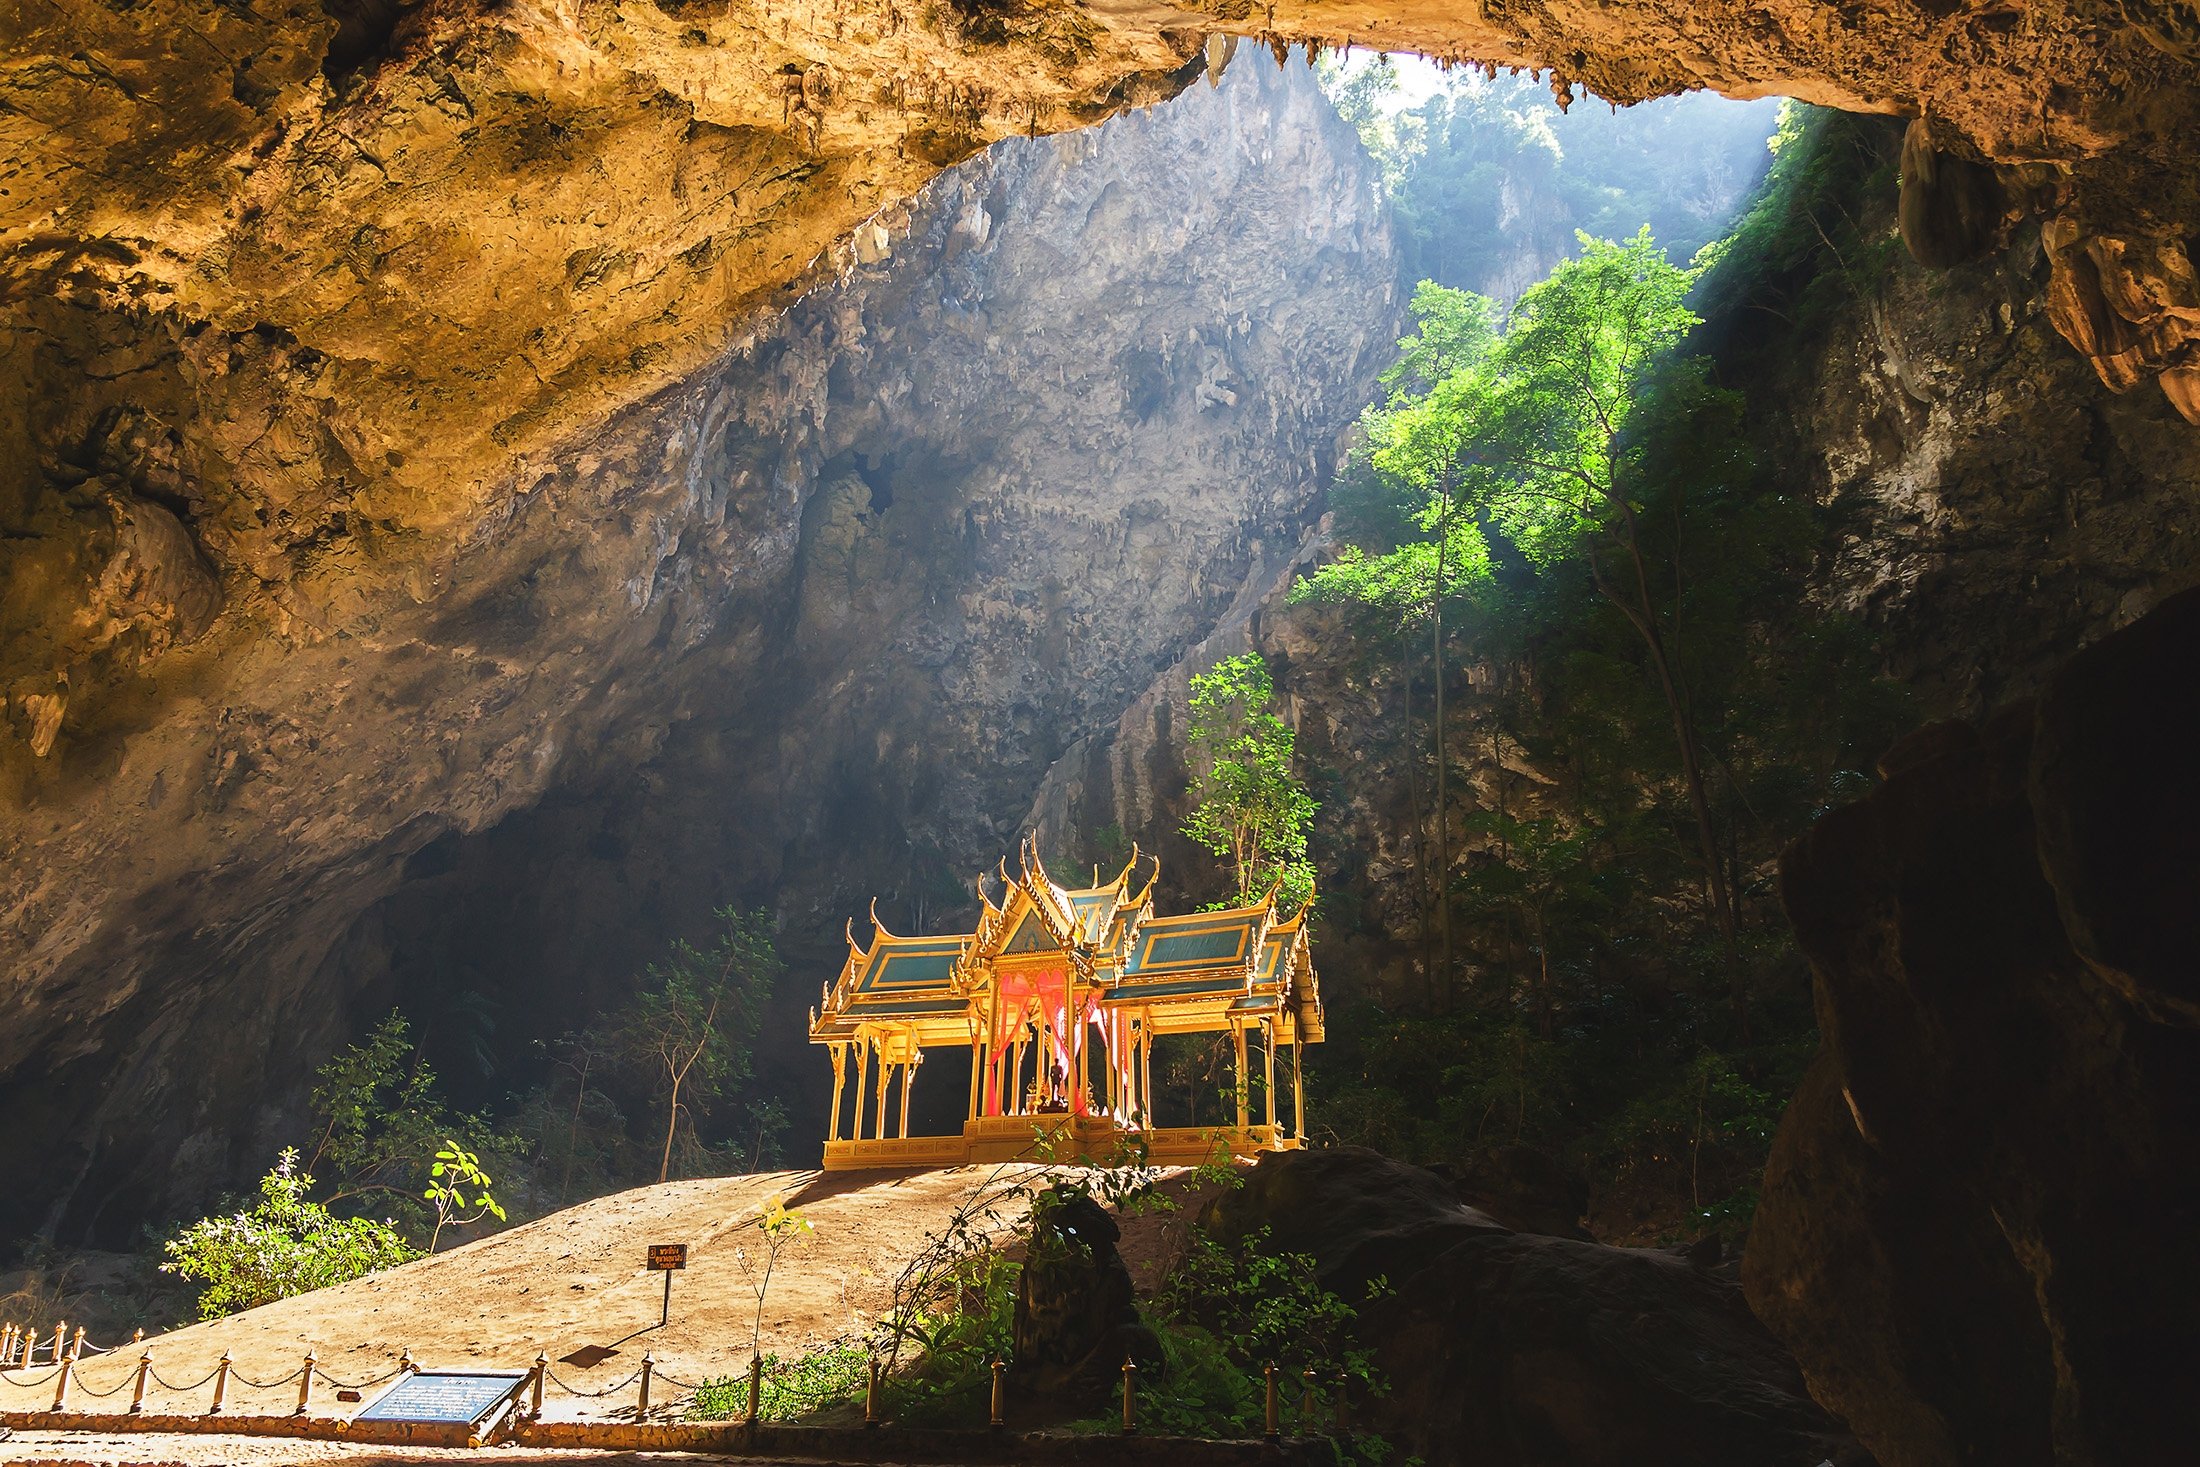 Phraya Nakhon in Thailand is a large cave with a hole in the ceiling that lets in sunlight, which sometimes shines directly on a pavilion in the heart of the cave.  (Photo Shutterstock)